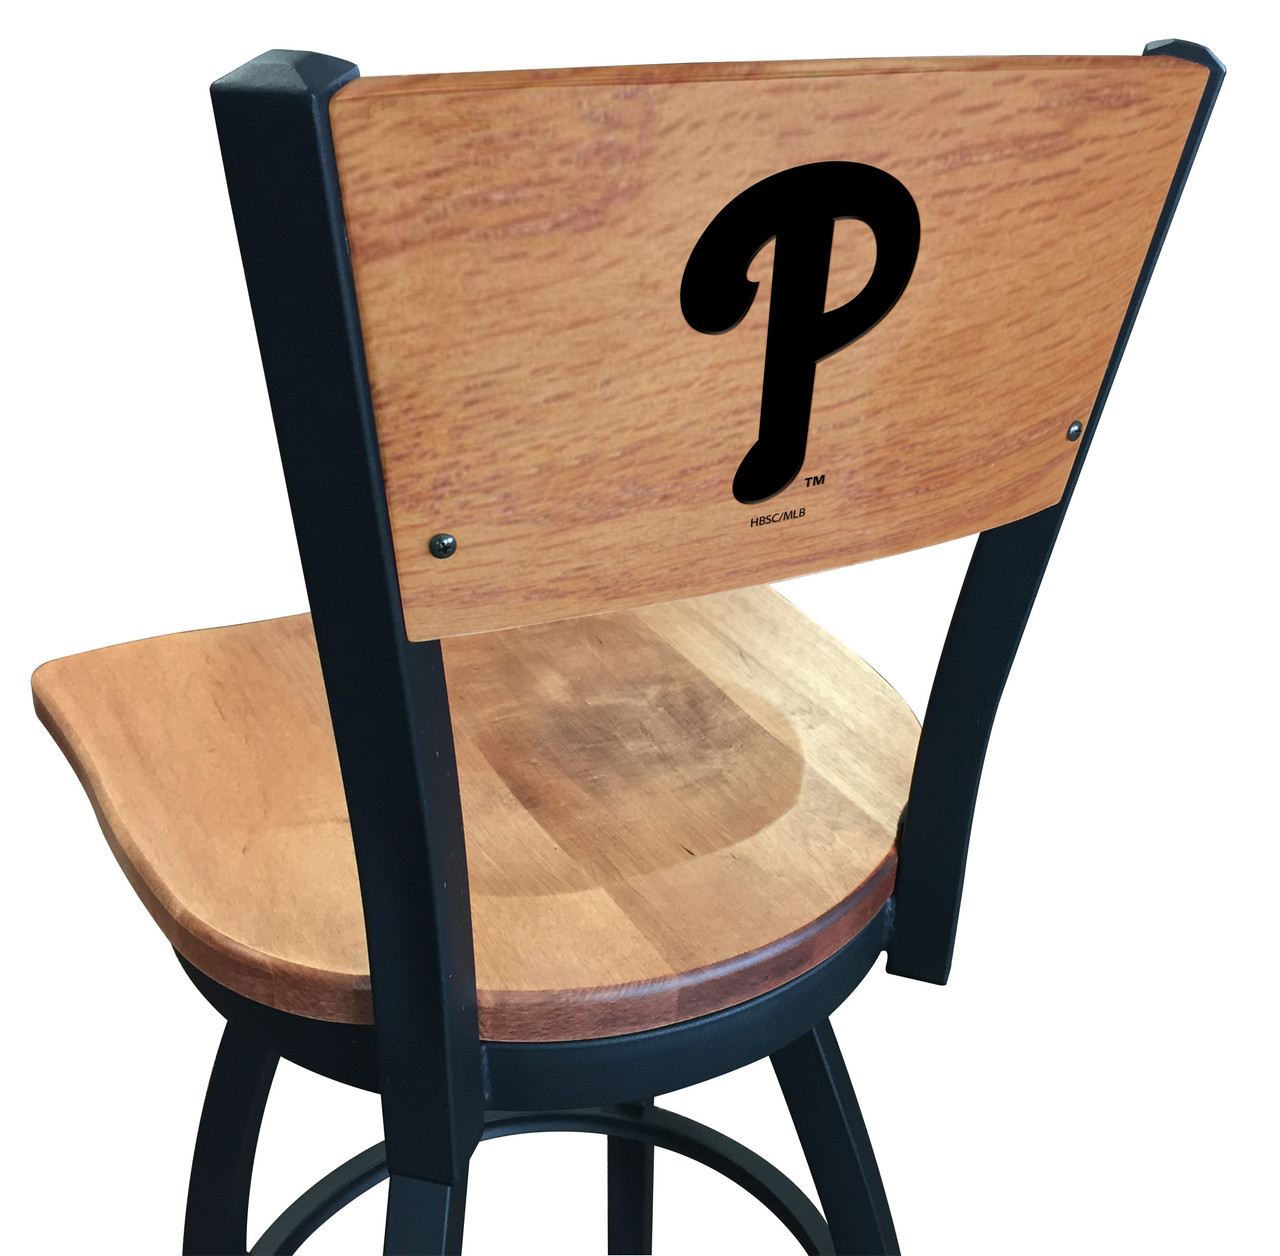 Philadelphia, Phillies, L038, Laser, Engraved, Wood, Back, Counter, Bar, Stool, 25", 30", 36", Maple, Wood, Seat, Holland Bar Stool,PHI, Phily, MLB, Fan Cave, Man Cave, L03825BWMedMplAMLBPhiMedMpl, 071235084028, L03830BWMedMplAMLBPhiMedMpl, 071235084769, L03836BWMedMplAMLBPhiMedMpl, 071235085506